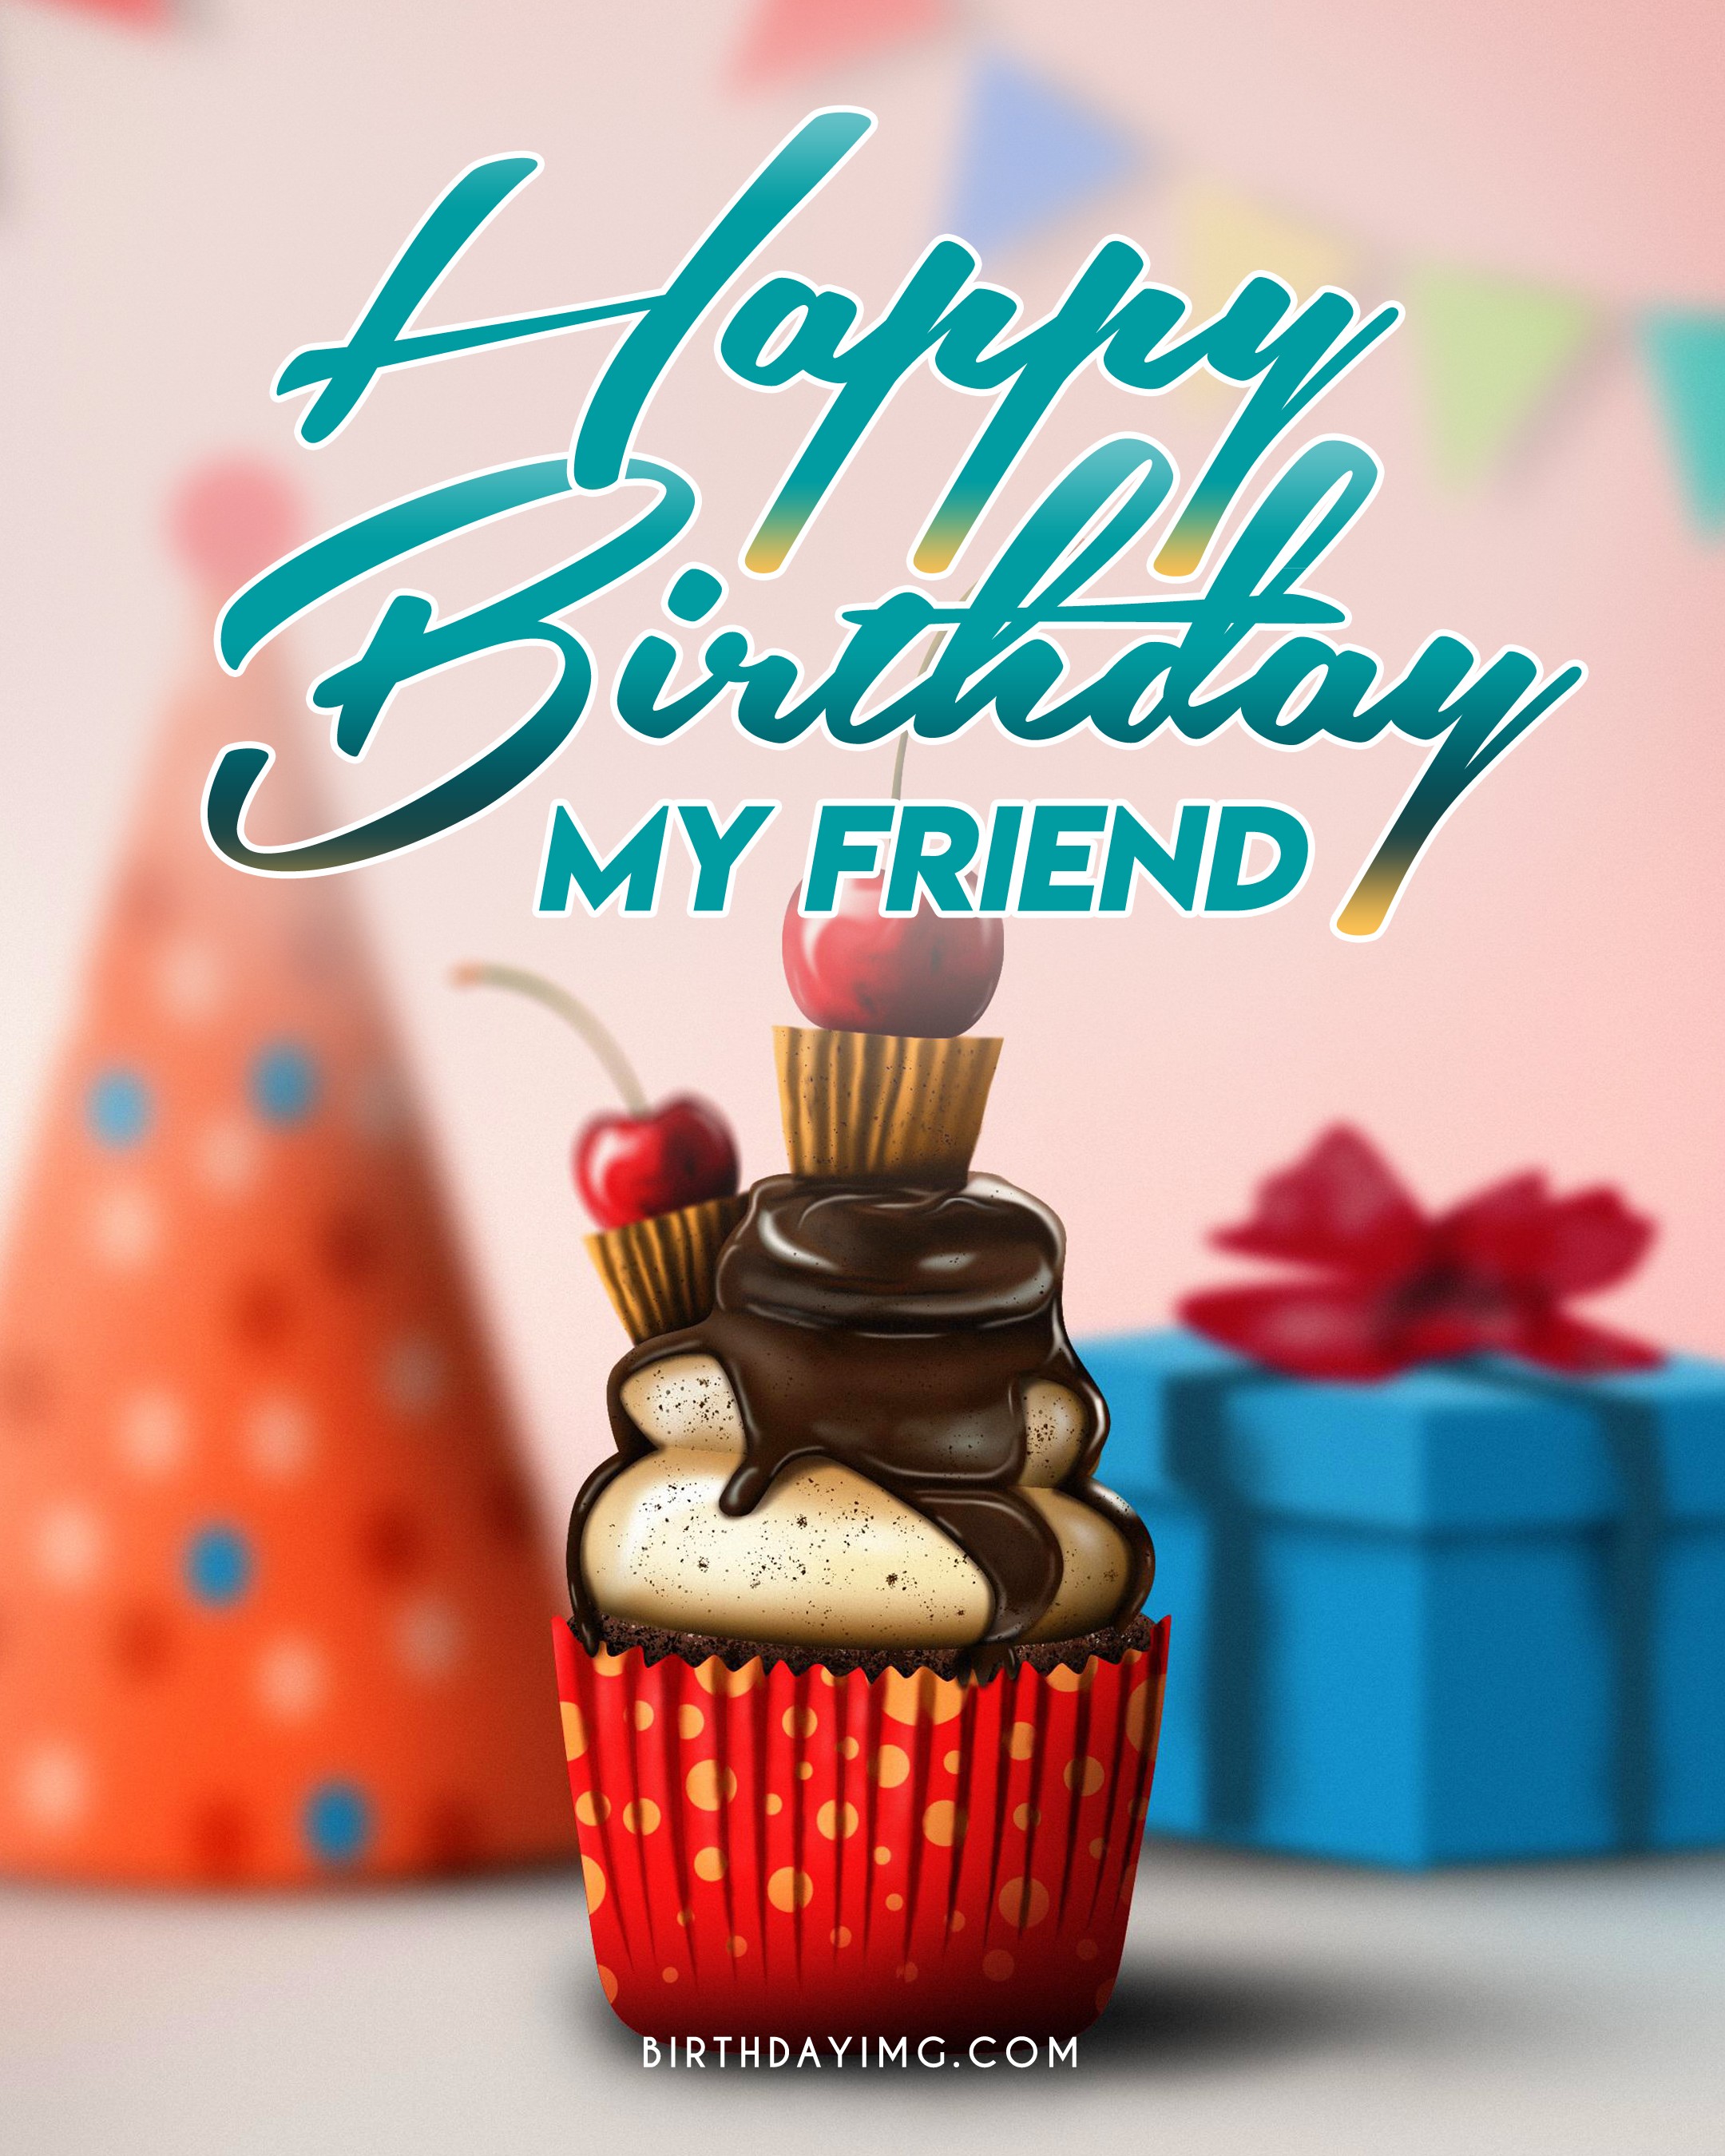 Friend Birthday - Cake & Red Flowers – Cards Delights